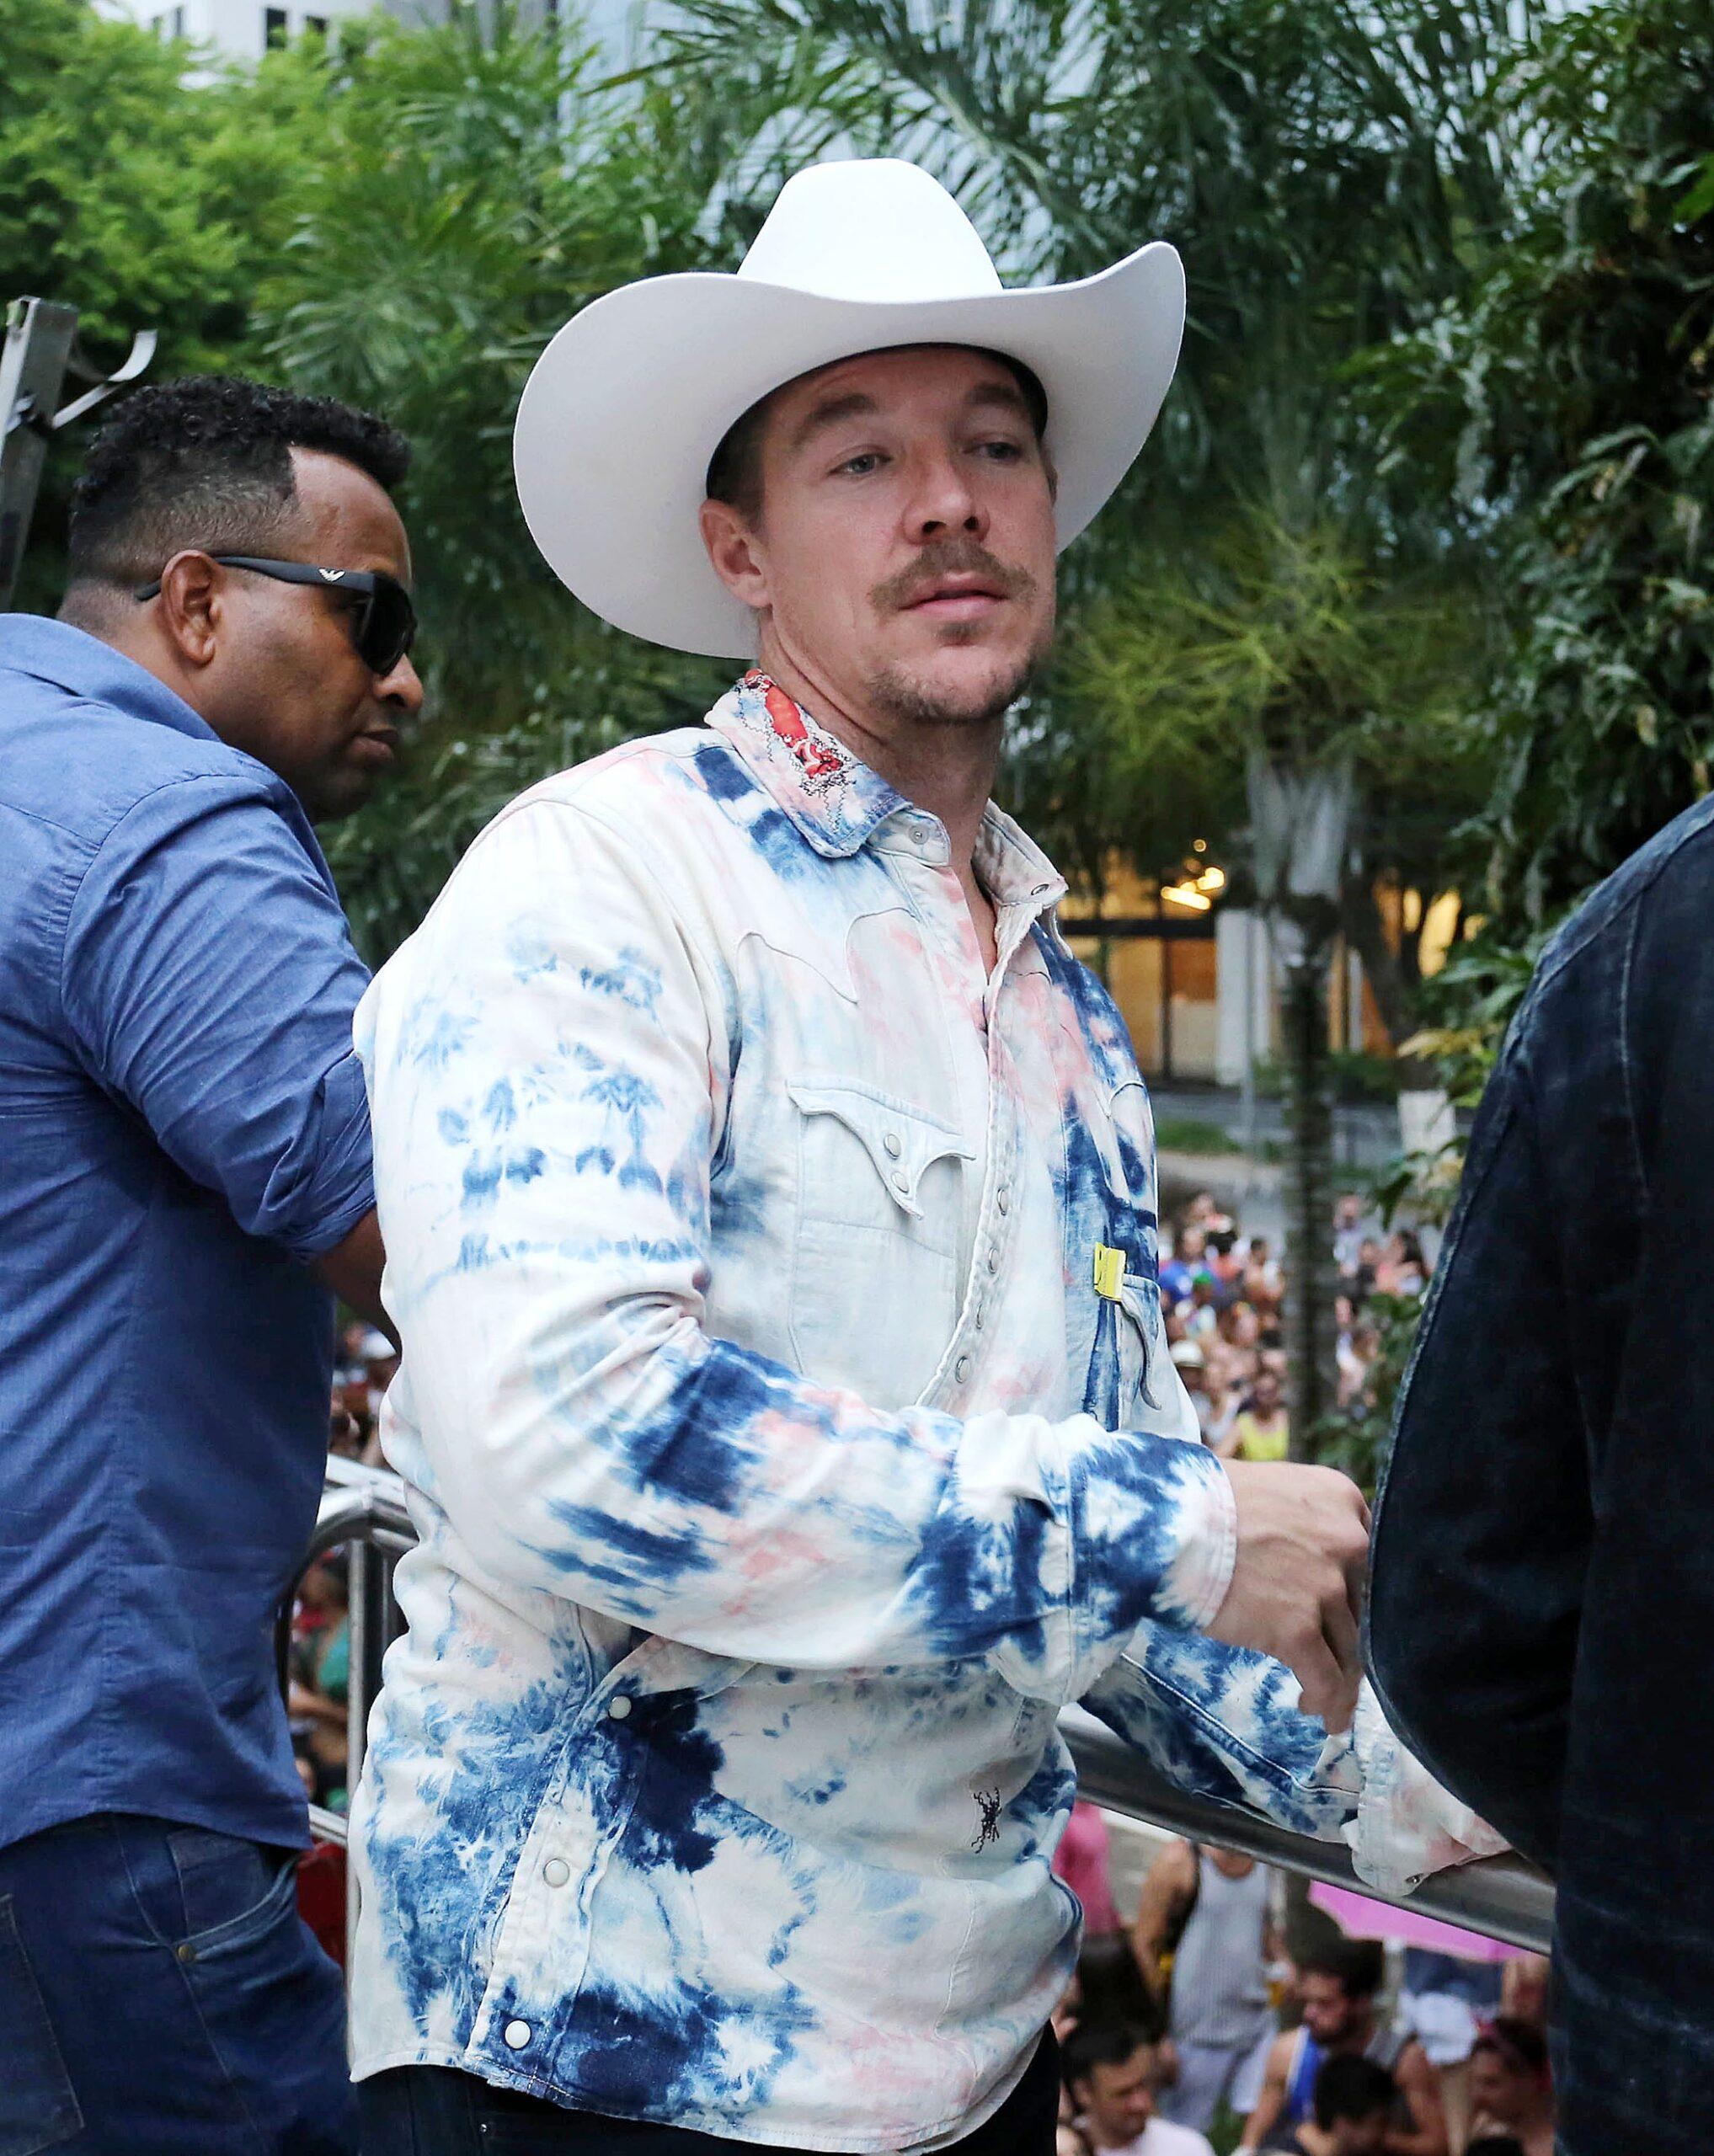 DJ Diplo from Major Lazer was performing at a minor parade in Sao Paulo when gunshots were fired and injured two people during Carnaval in Brazil